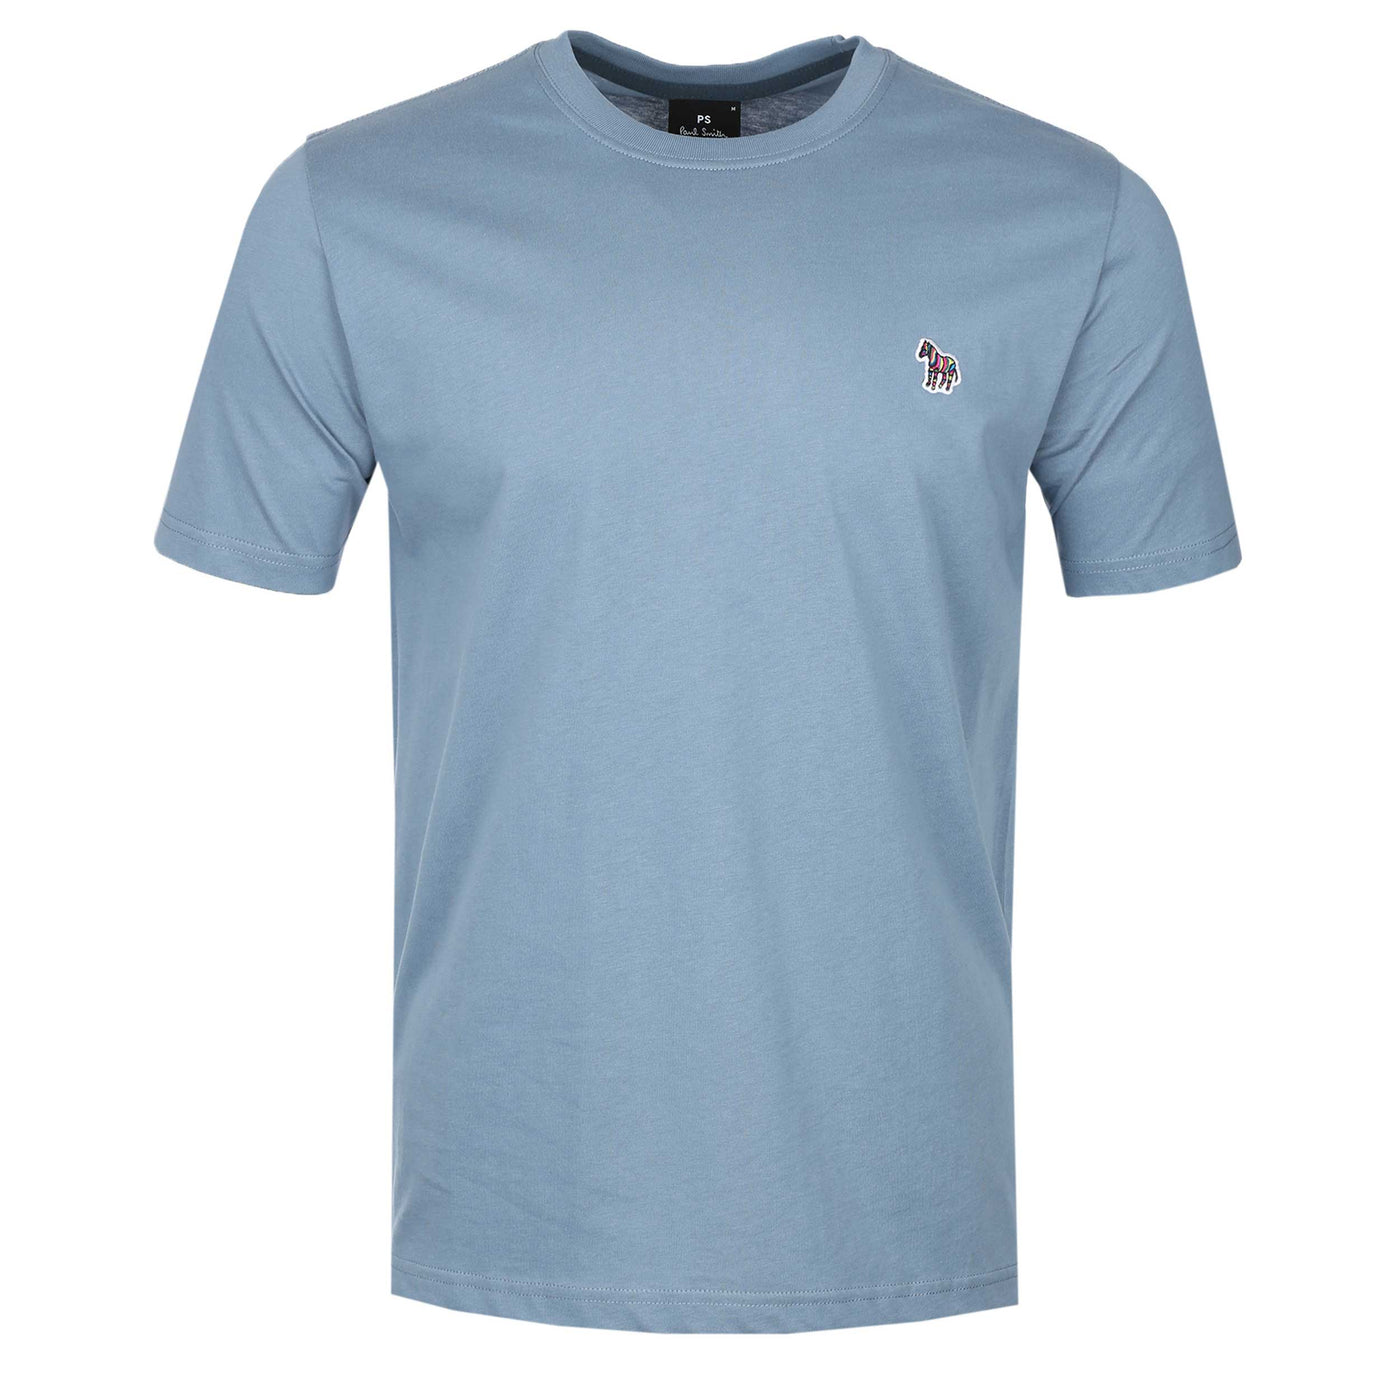 Paul Smith Zebra Badge T Shirt in Airforce Blue